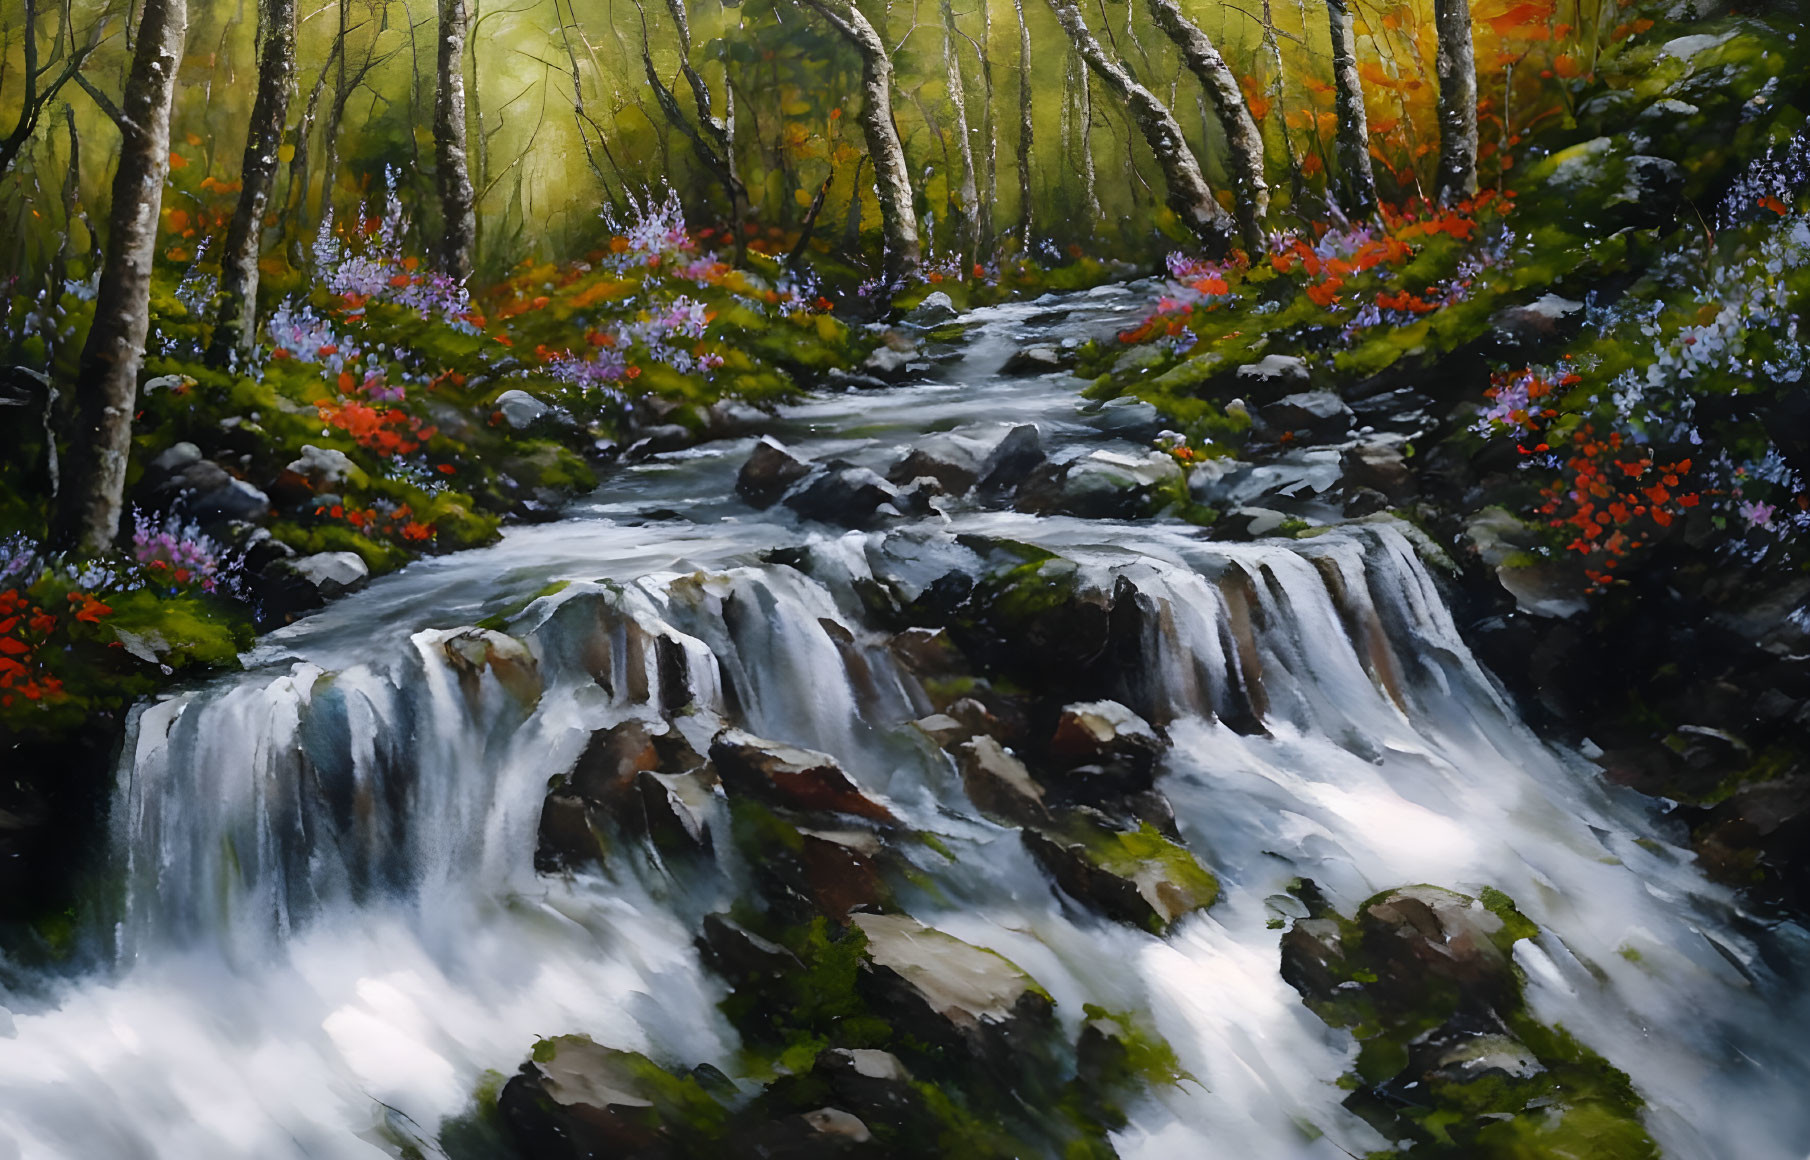 Tranquil waterfall scene with lush forest surroundings